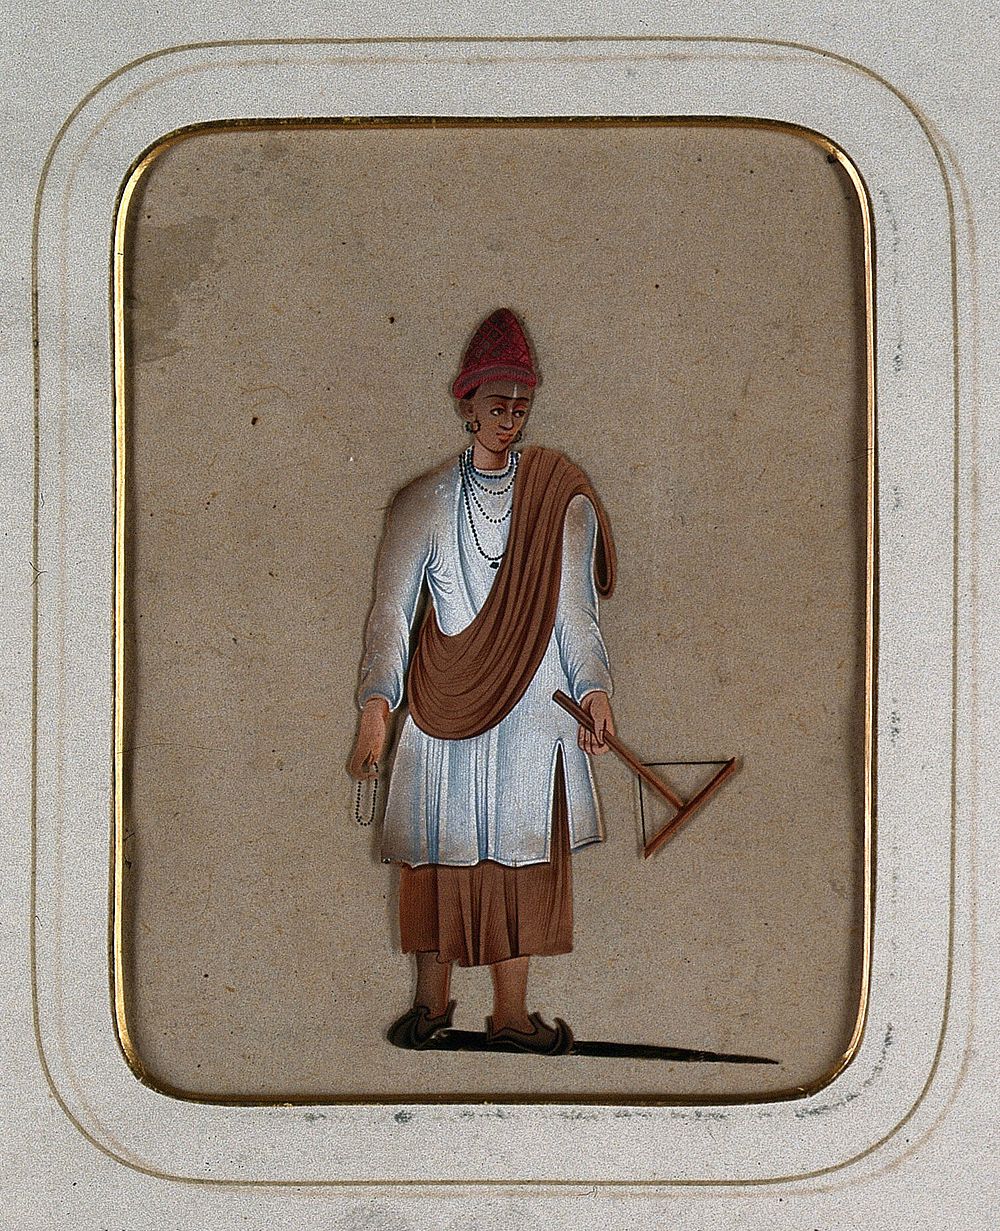 A young man holding rosary beads in one hand and a tool of his trade in the other. Gouache painting on mica by an Indian…